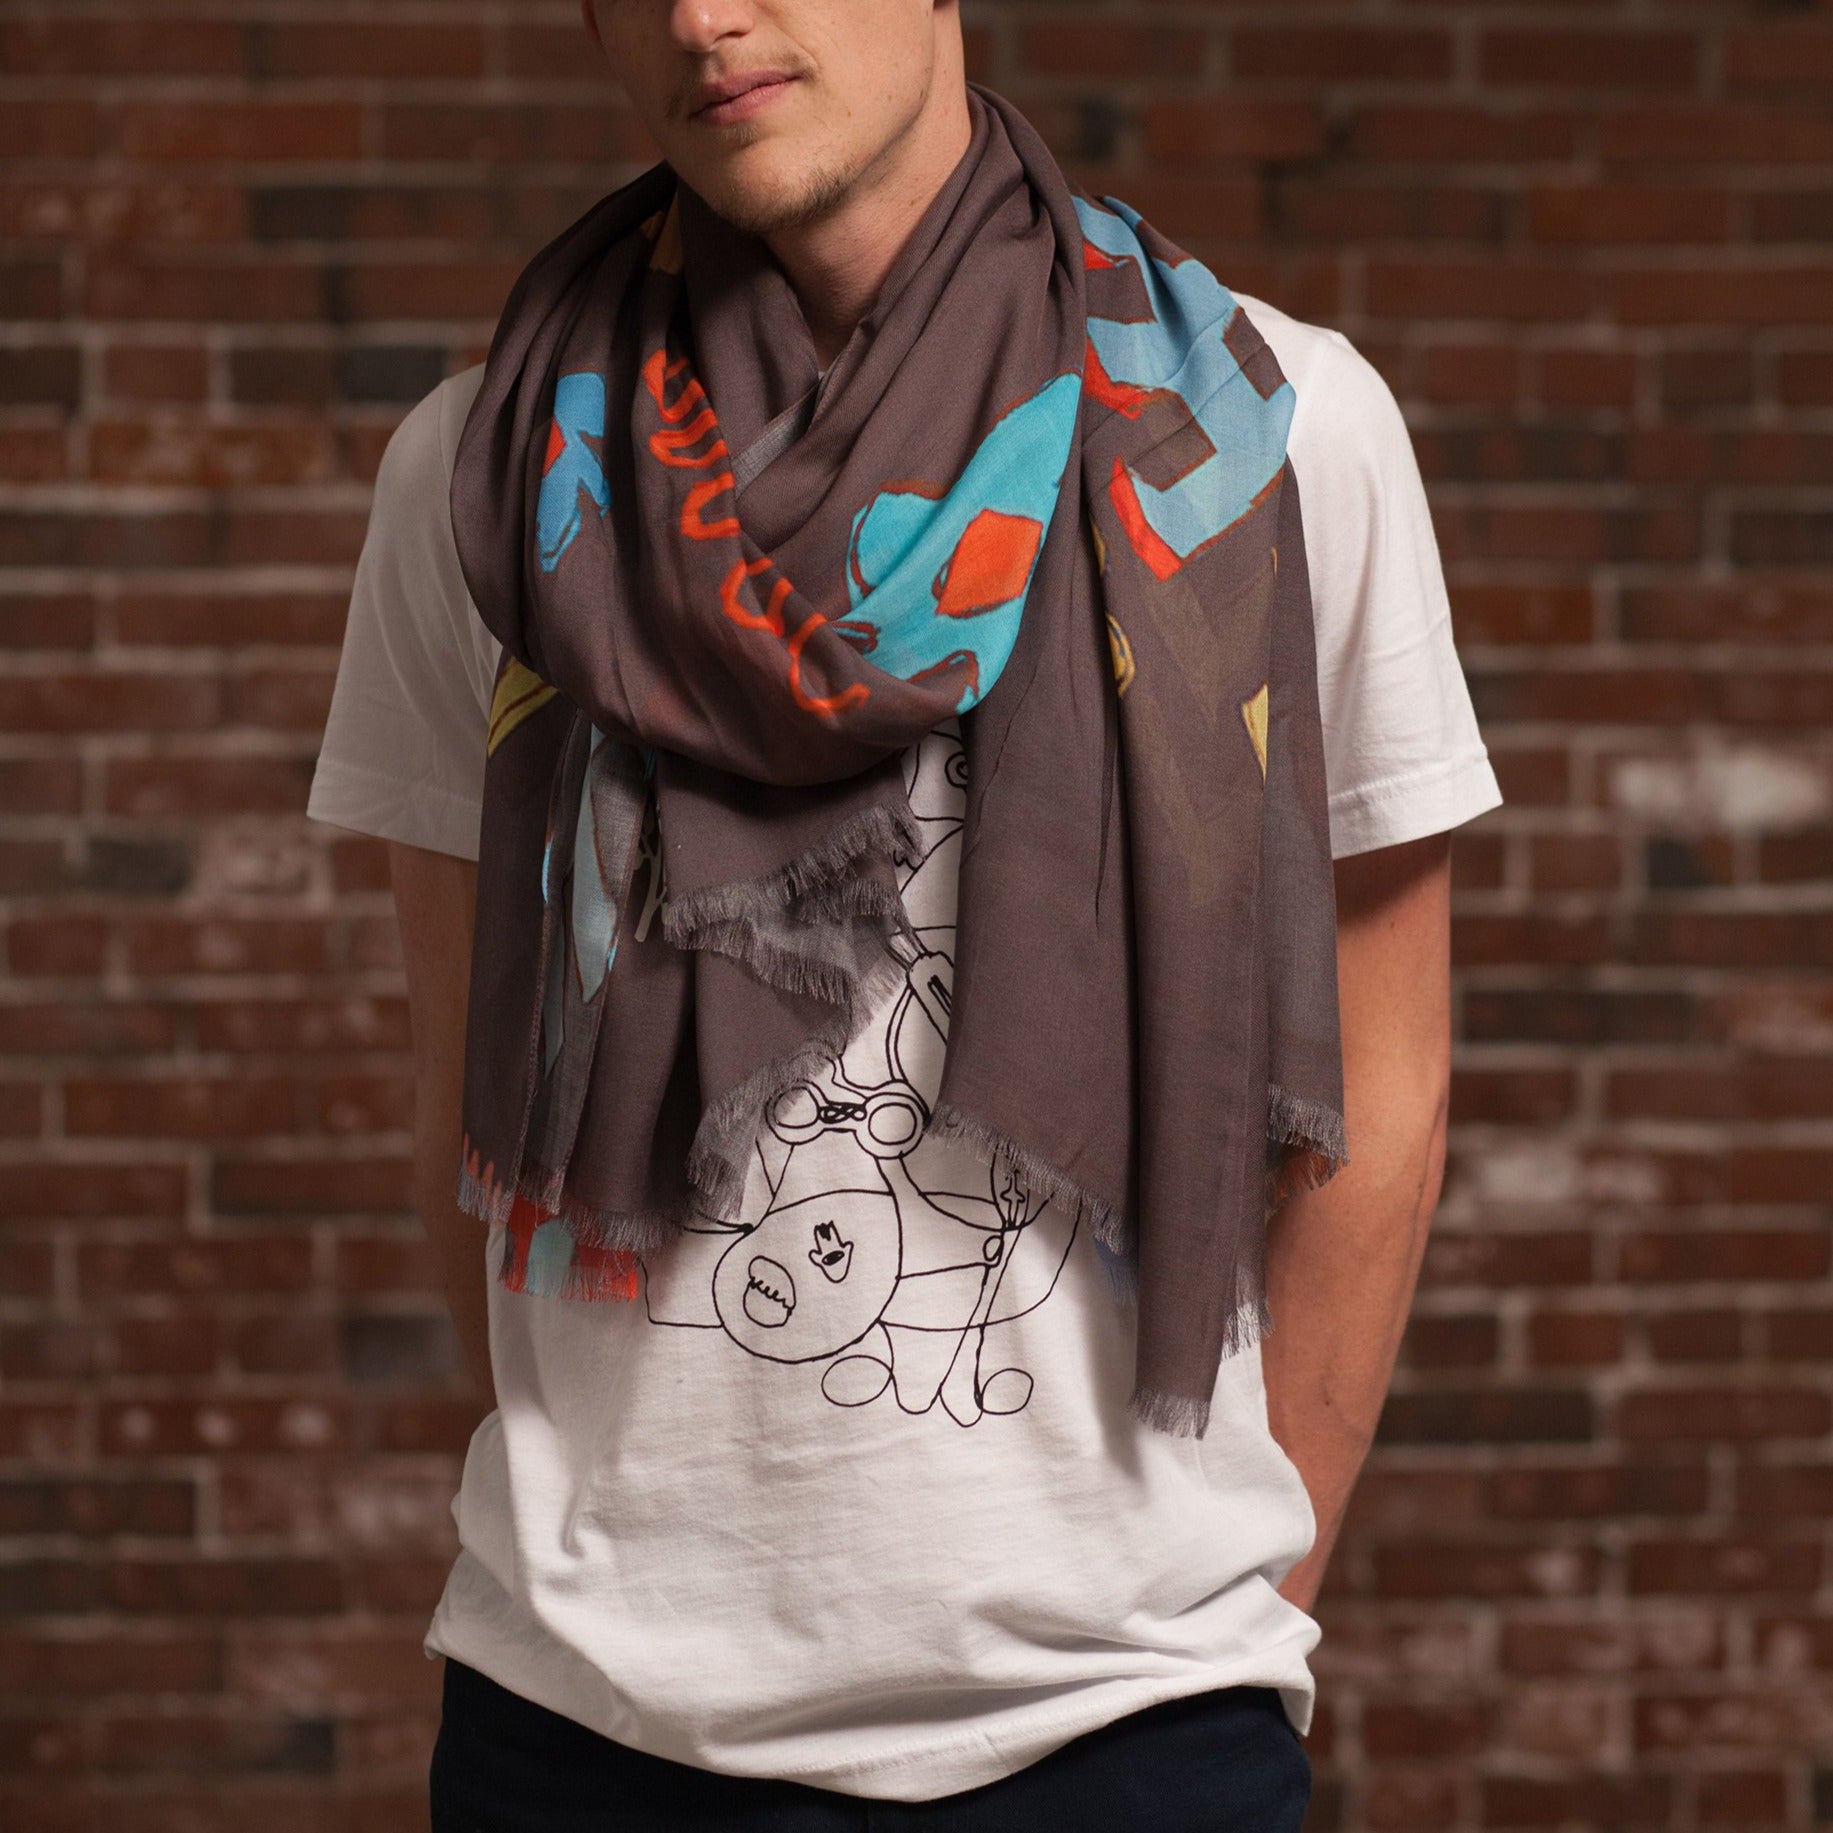 Djenné Wahala Mud Large Art Cashmere Blend Scarf loose wrap on male model in white t-shirt